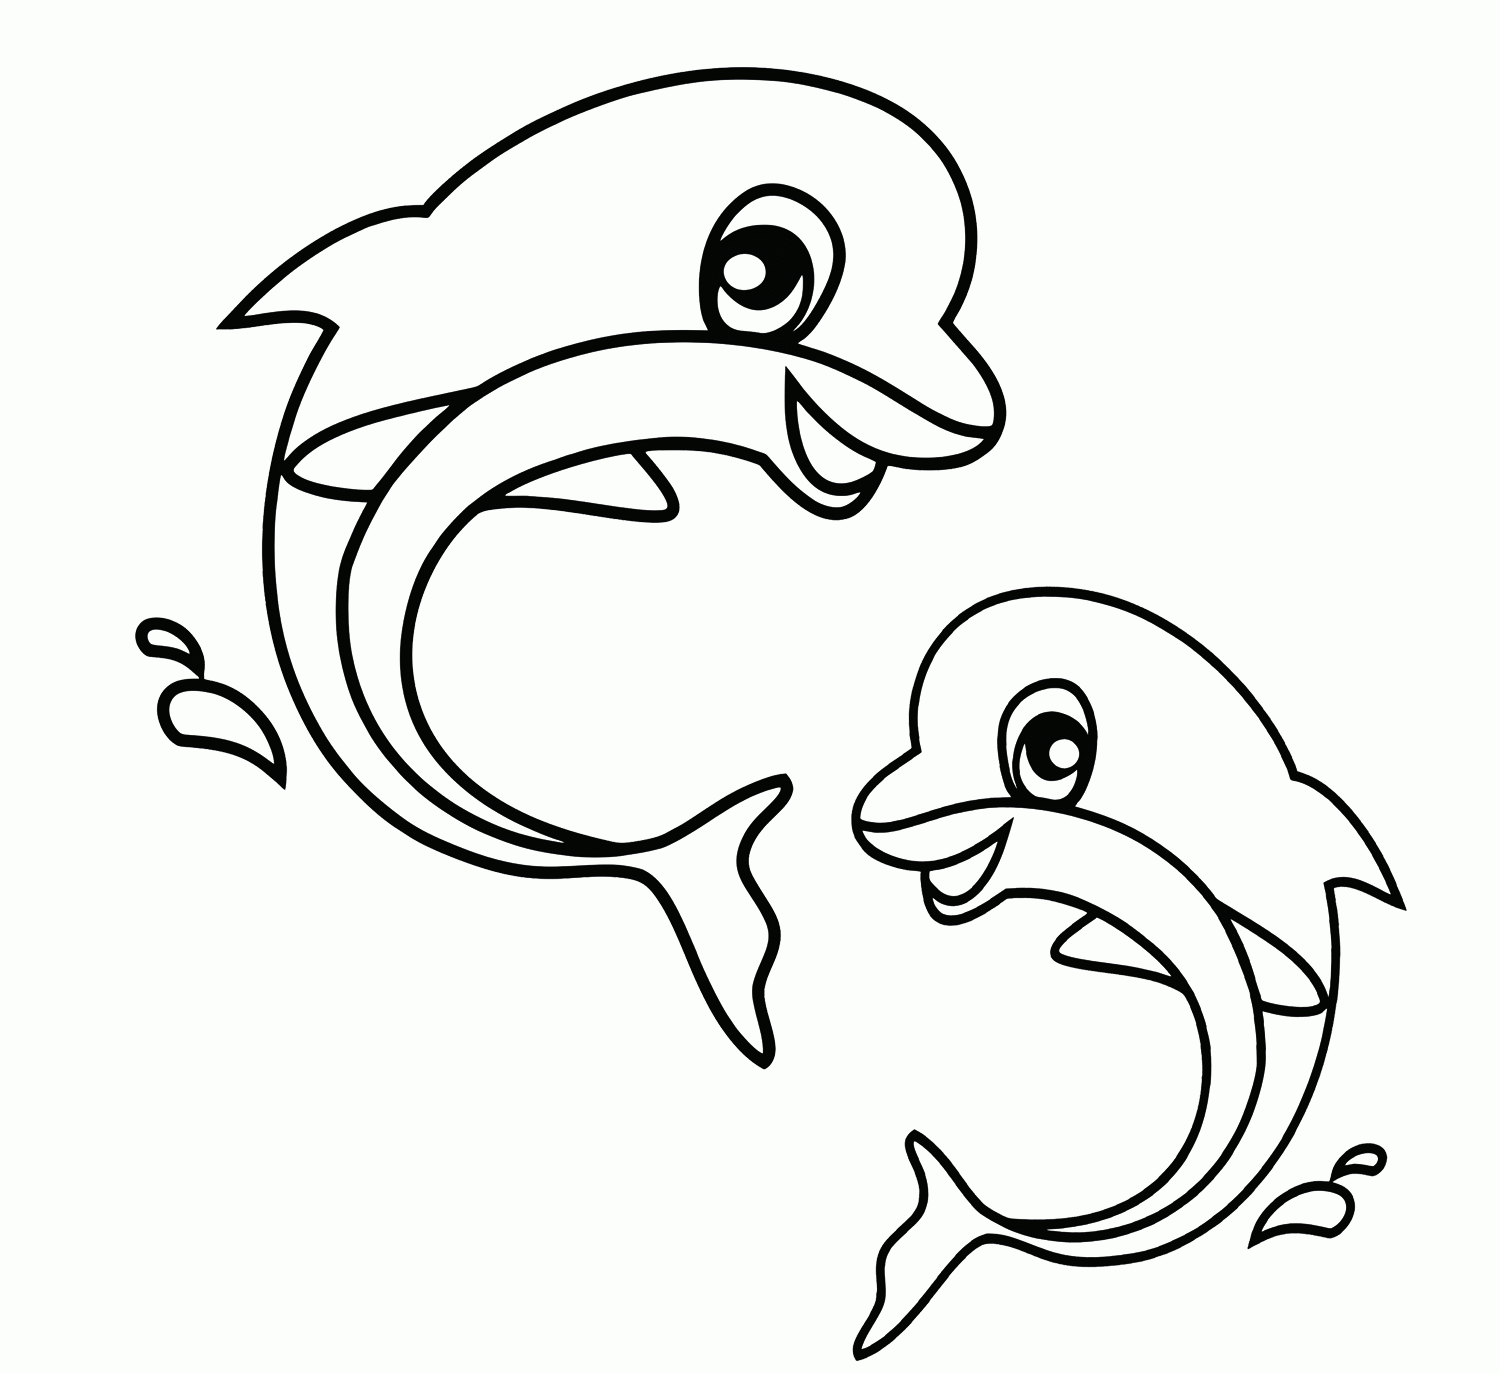 Related Ocean Coloring Pages Item 20, Ocean Coloring Pages Sea ...